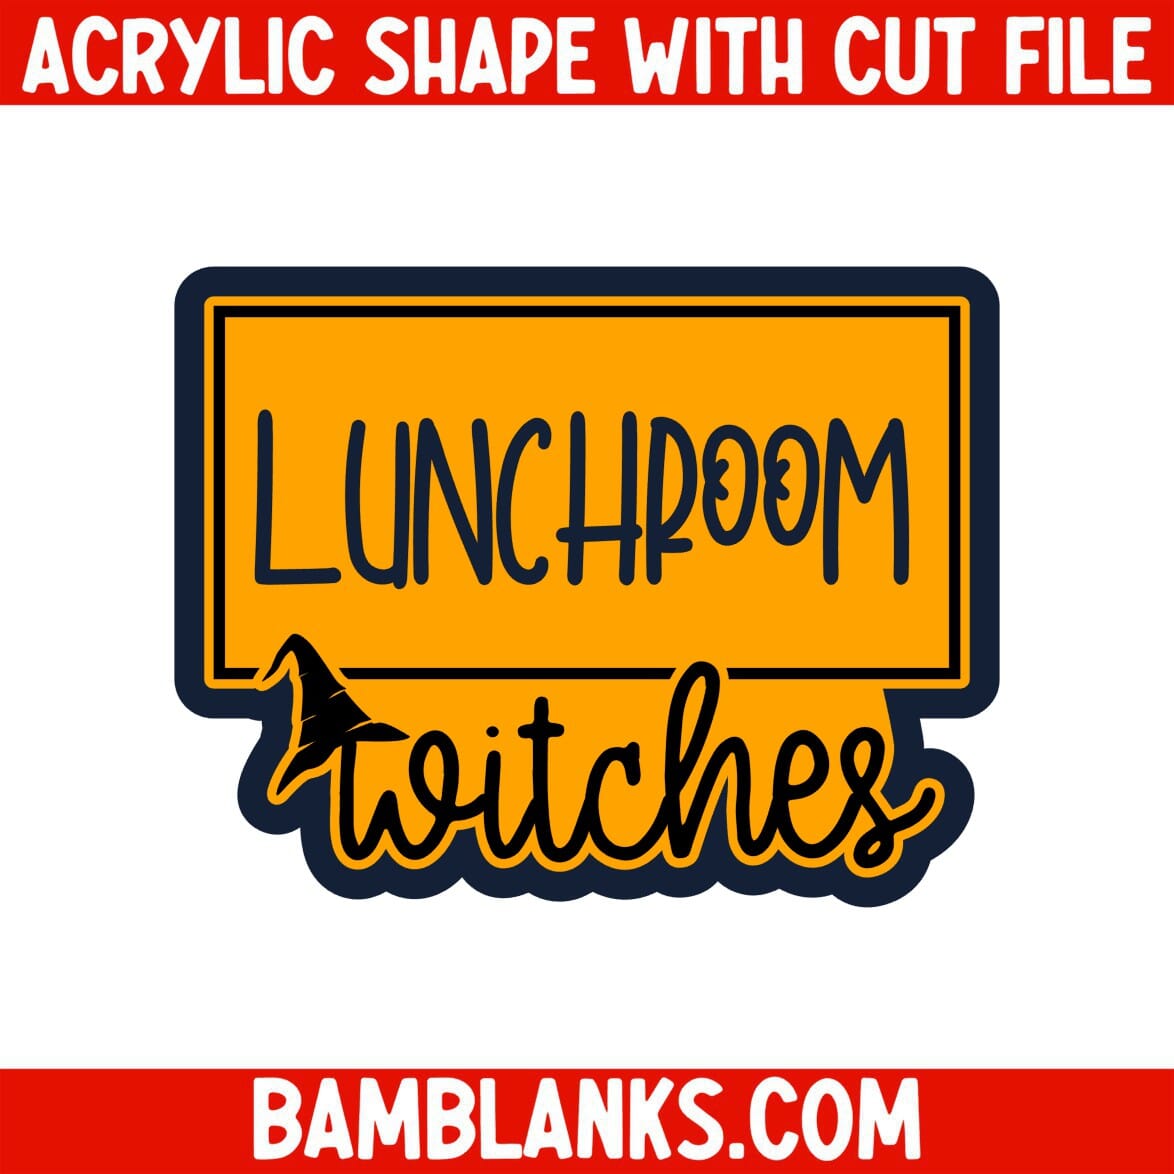 Lunchroom Witches - Acrylic Shape #2244